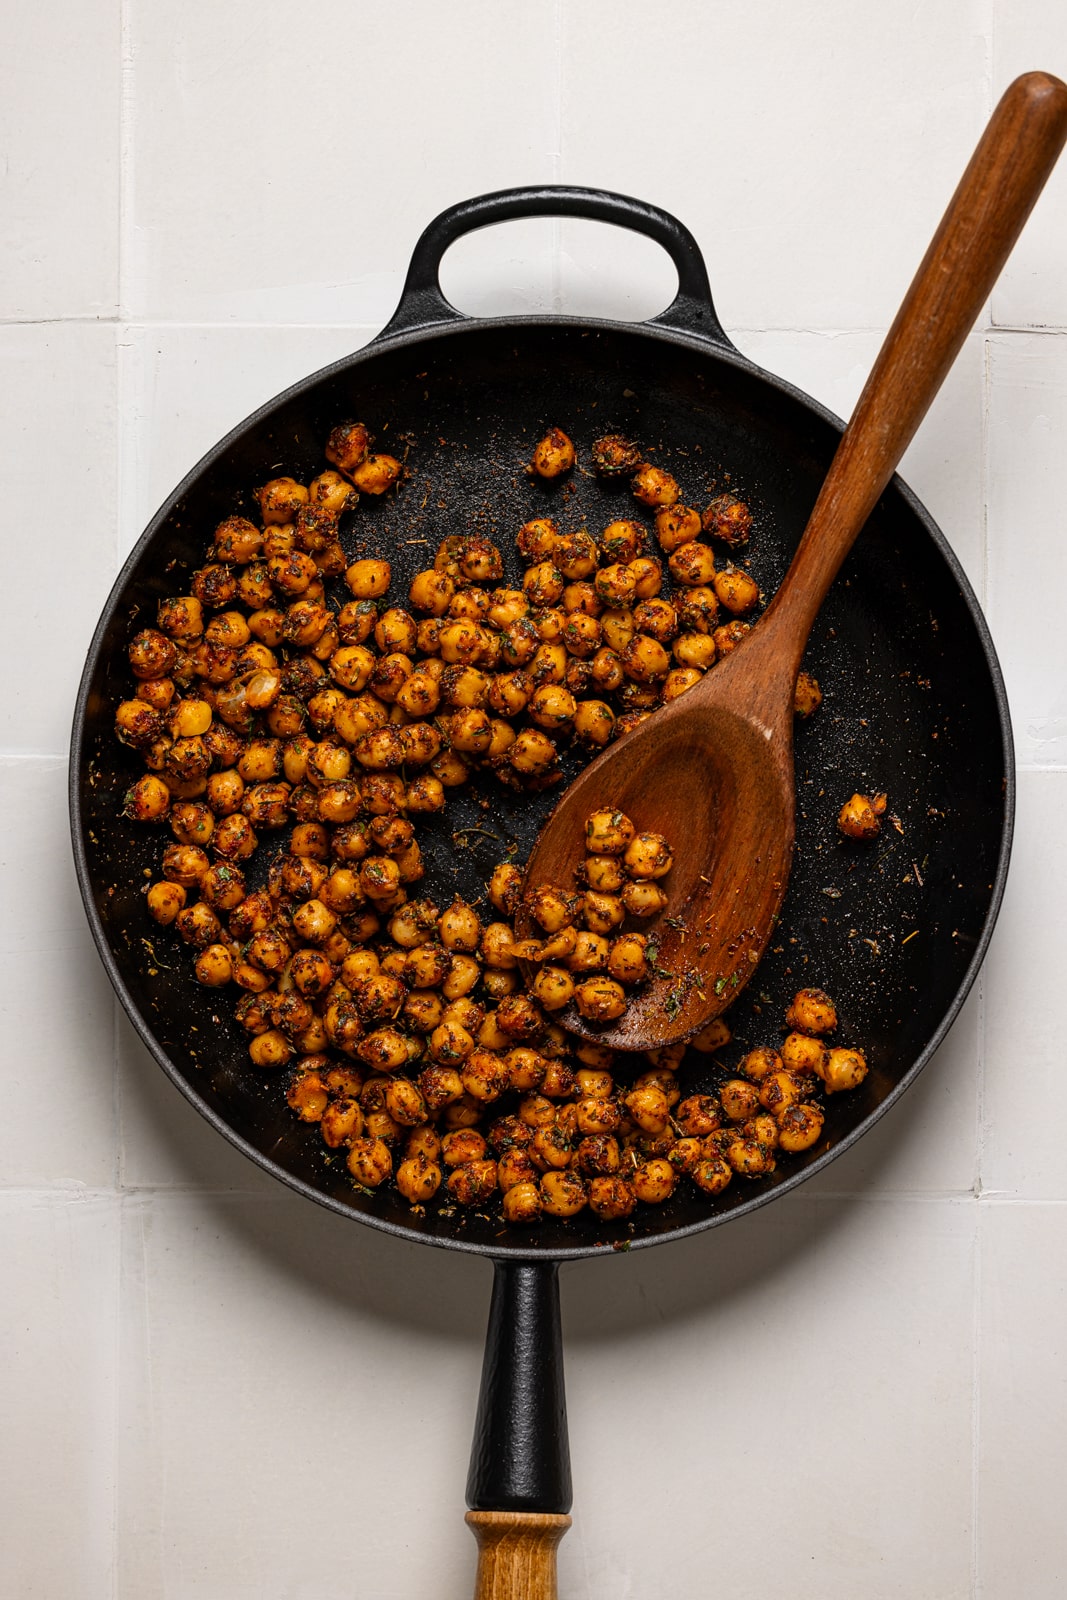 Sauteed chickpeas in a skillet with wooden spoon.